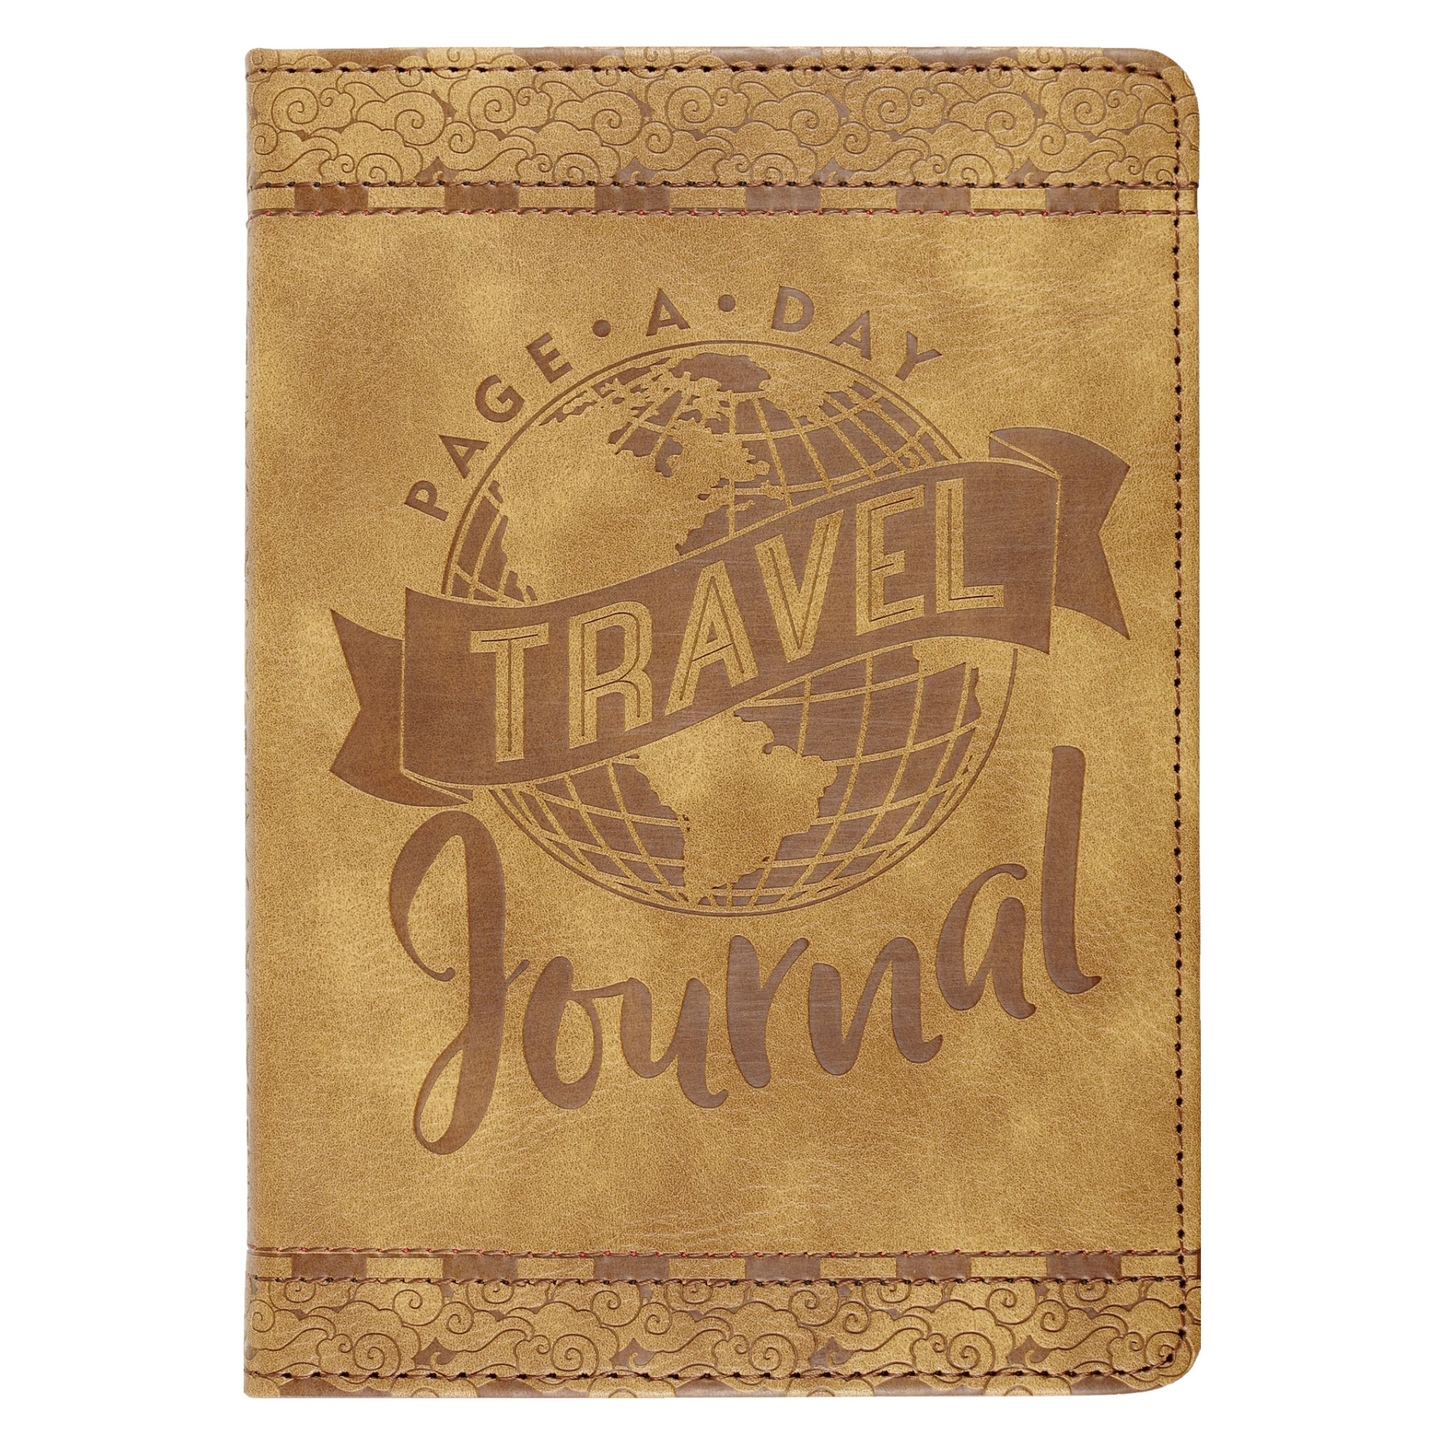 Artisan Travel Lined & Notated Journal  #331335-2